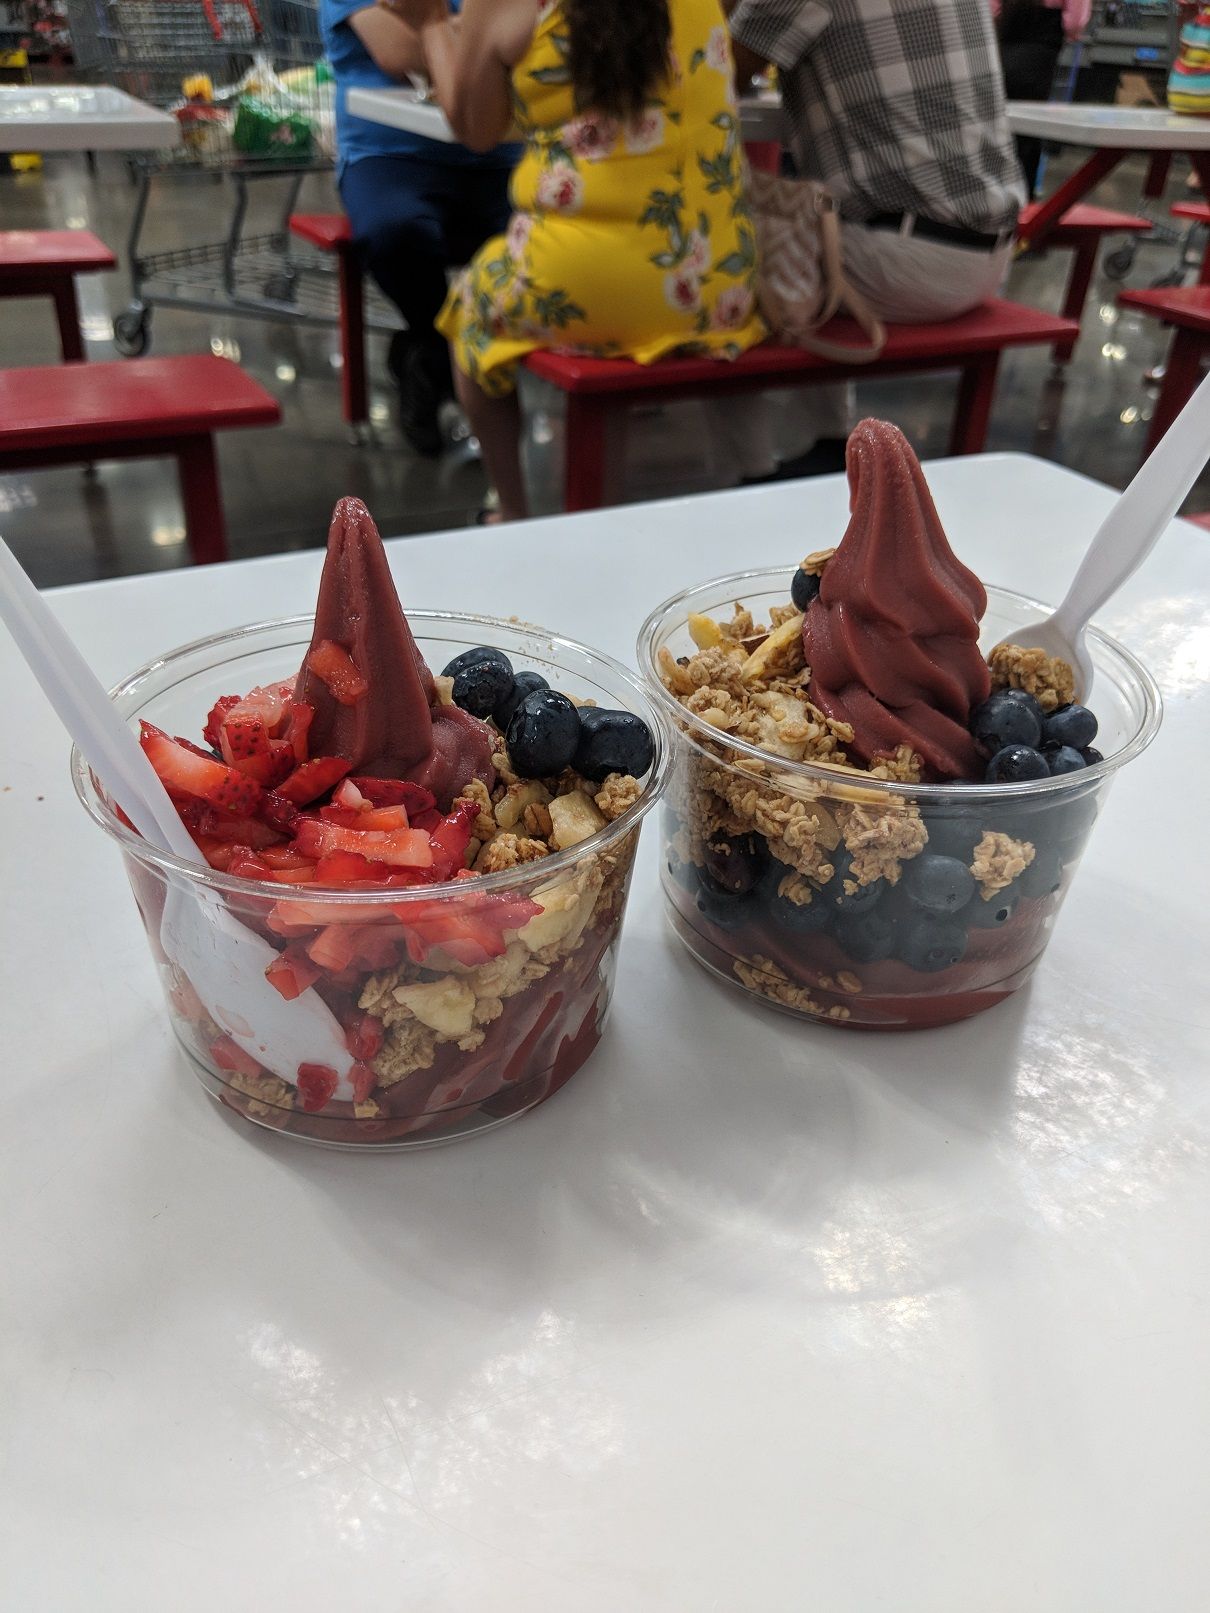 The acai bowls for my friend and I.